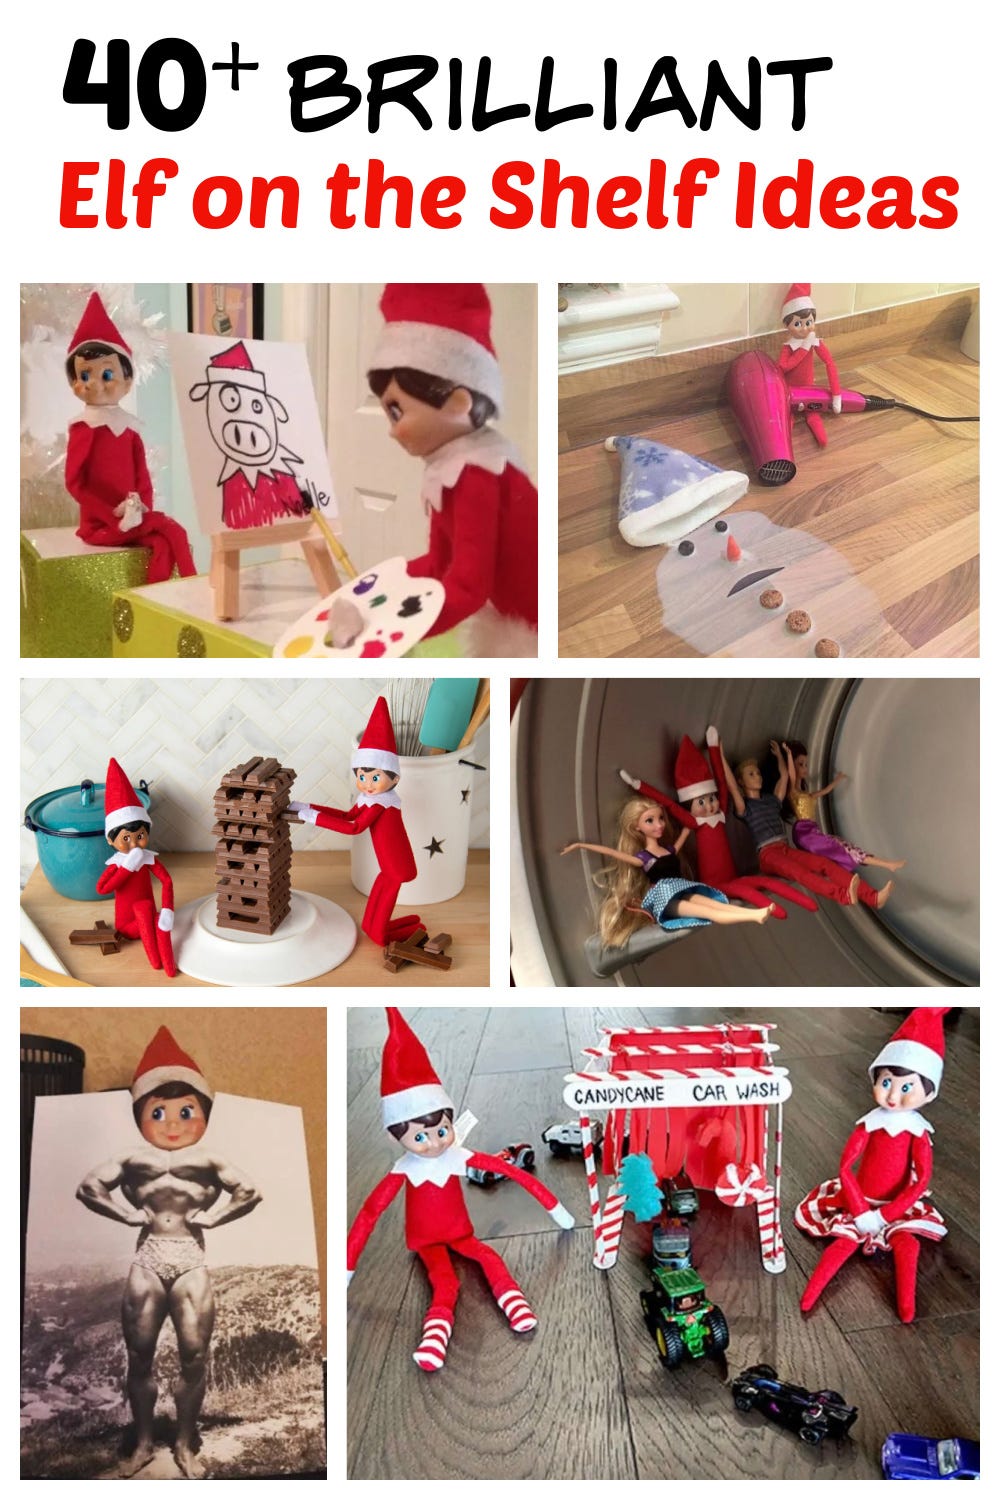 Elf on the Shelf Ideas - the absolute BEST of the best - Paging Fun Mums